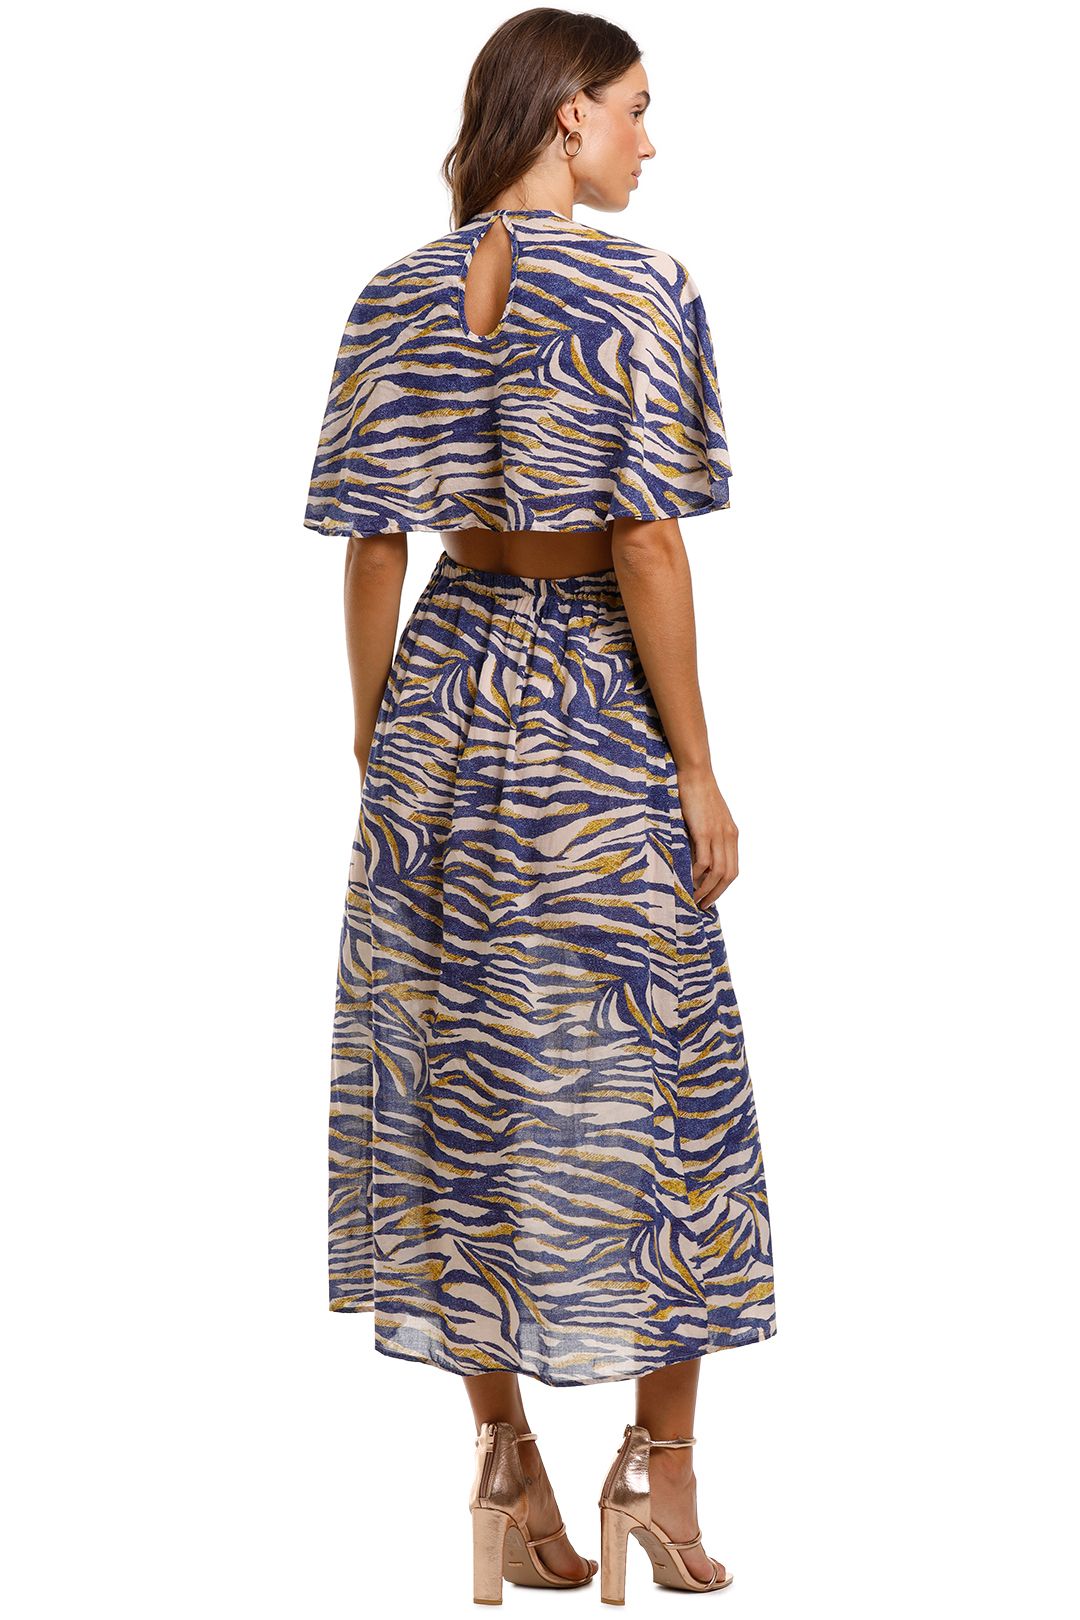 Suboo Into The Wilds Cape Dress Animal Print Open Back